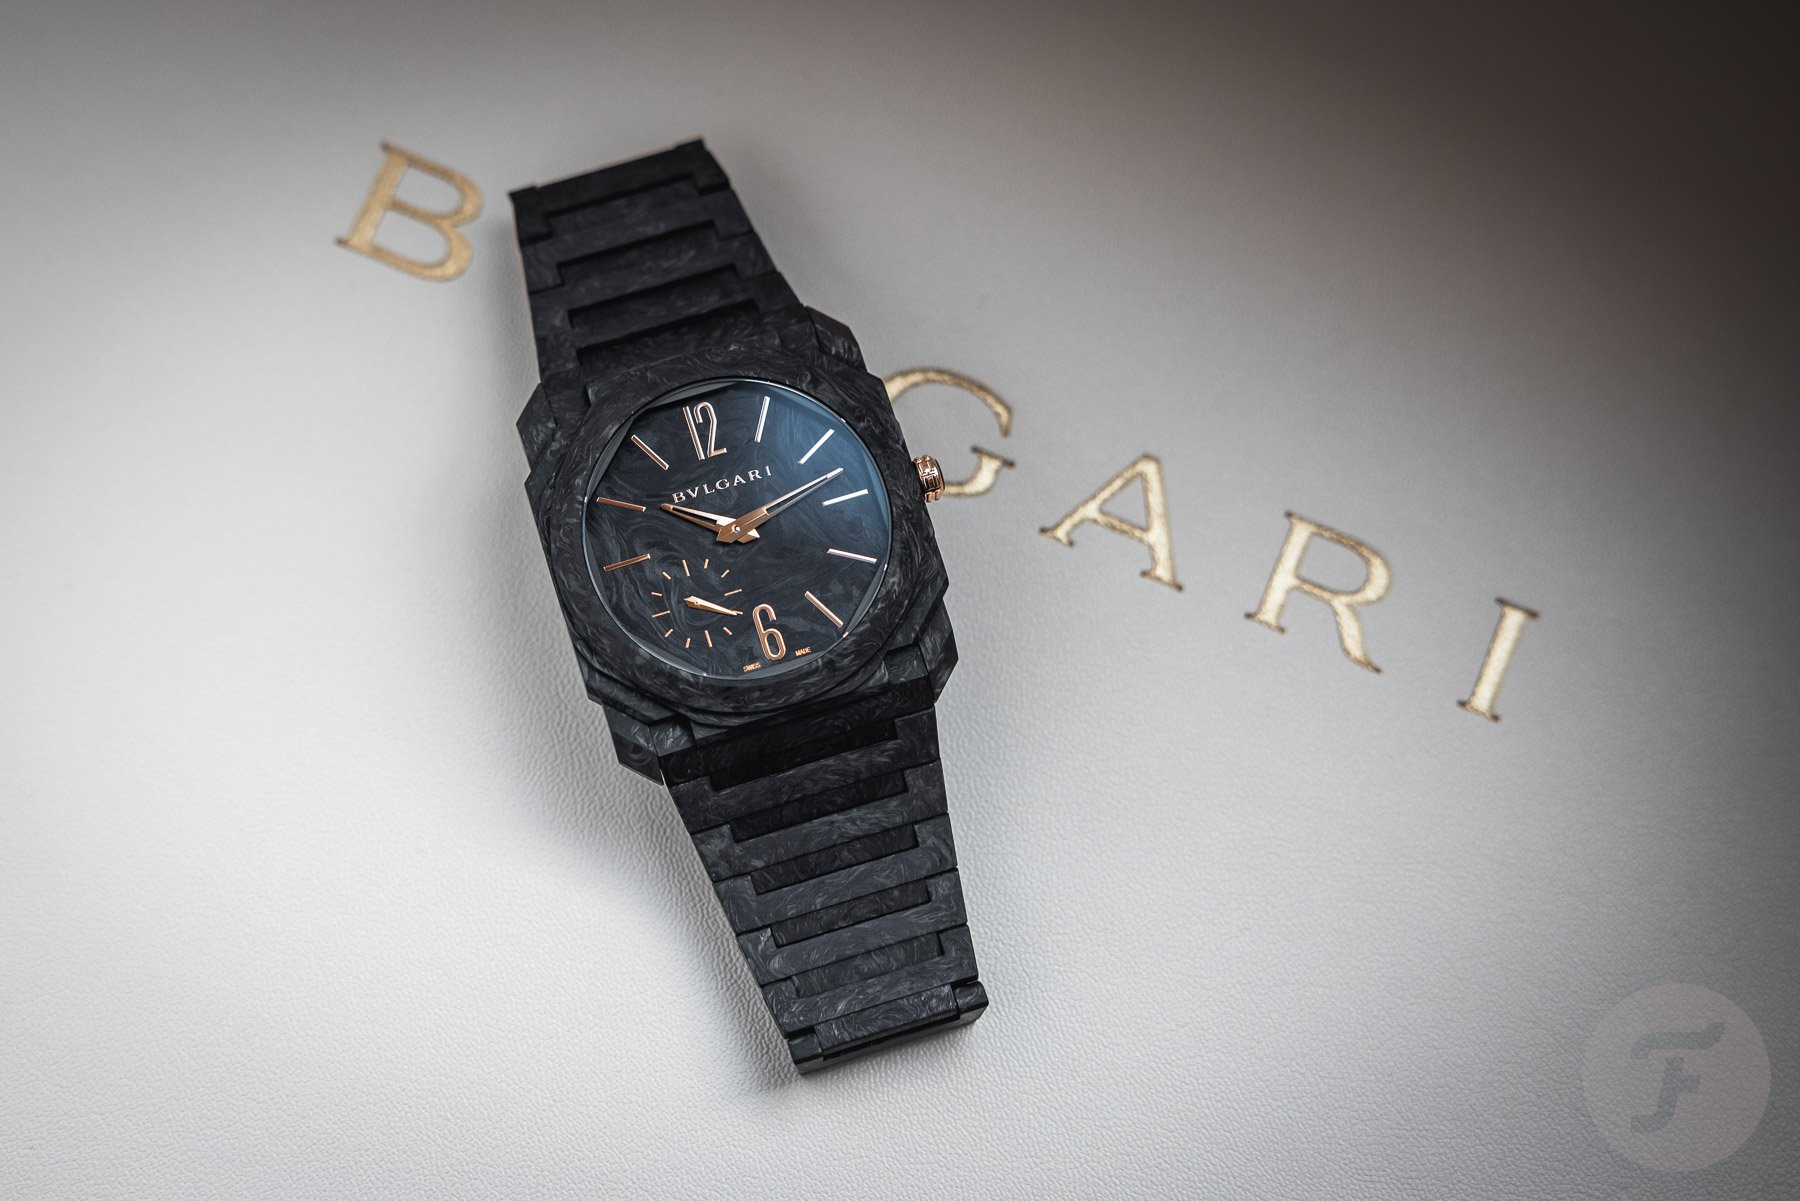 Bvlgari Octo Finissimo CarbonGold LVMH luxury watch